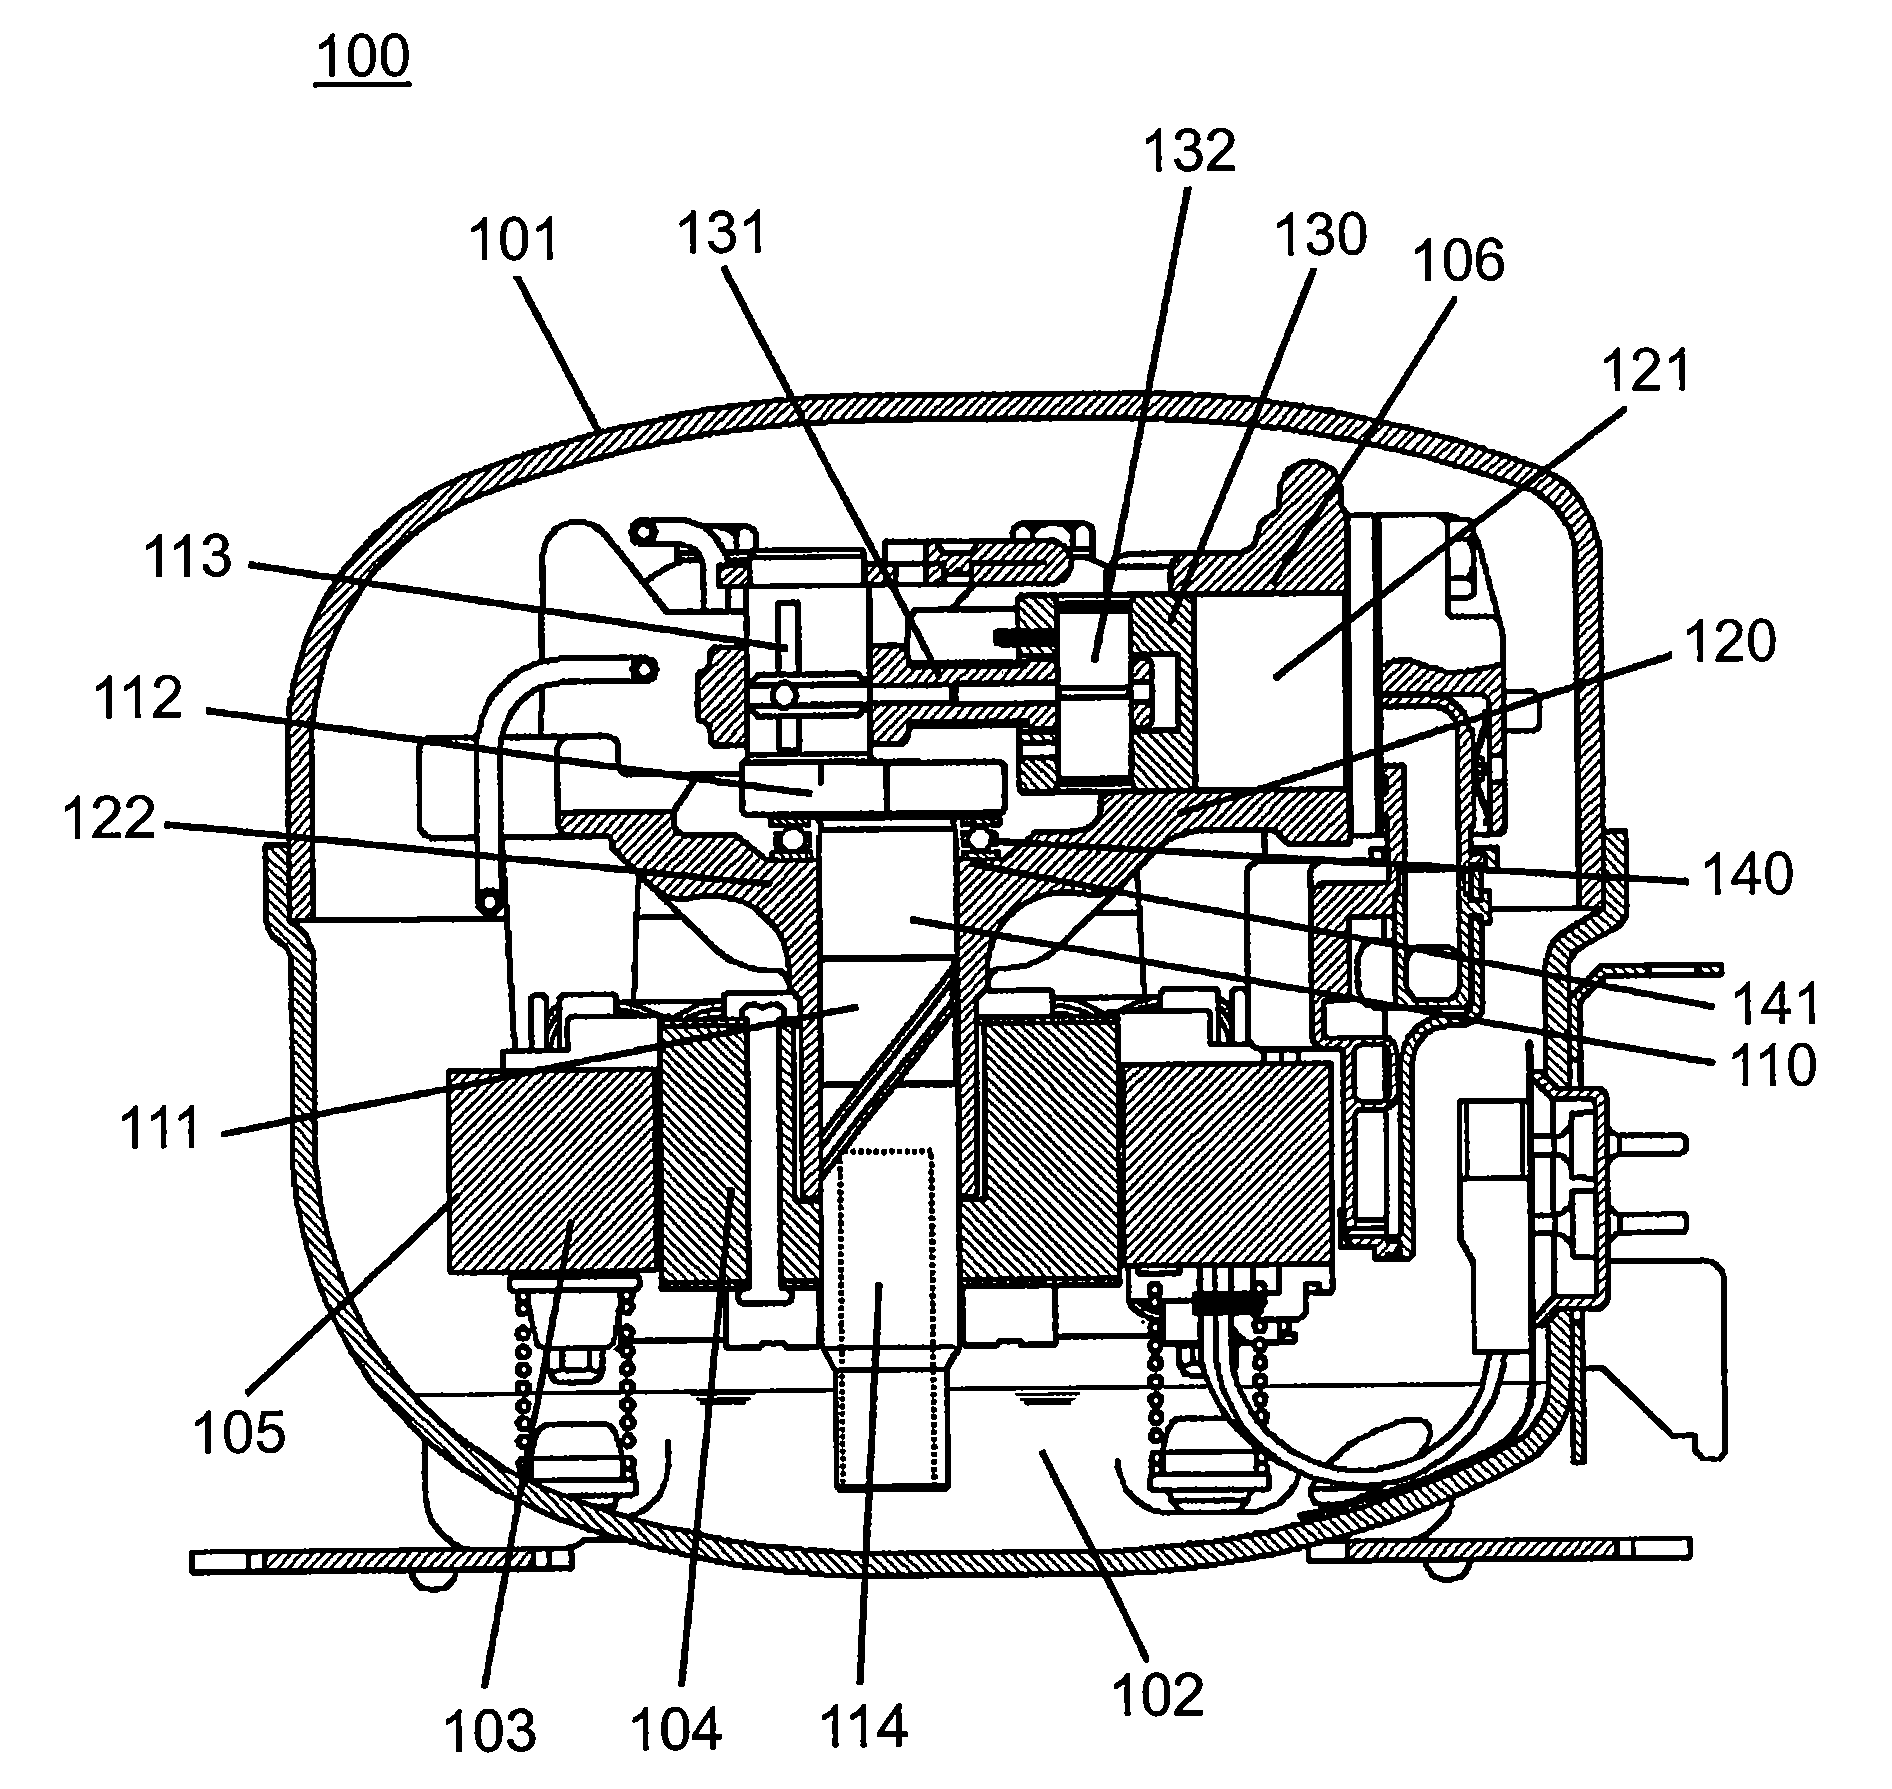 Hermetic reciprocating compressor with thrust ball bearing